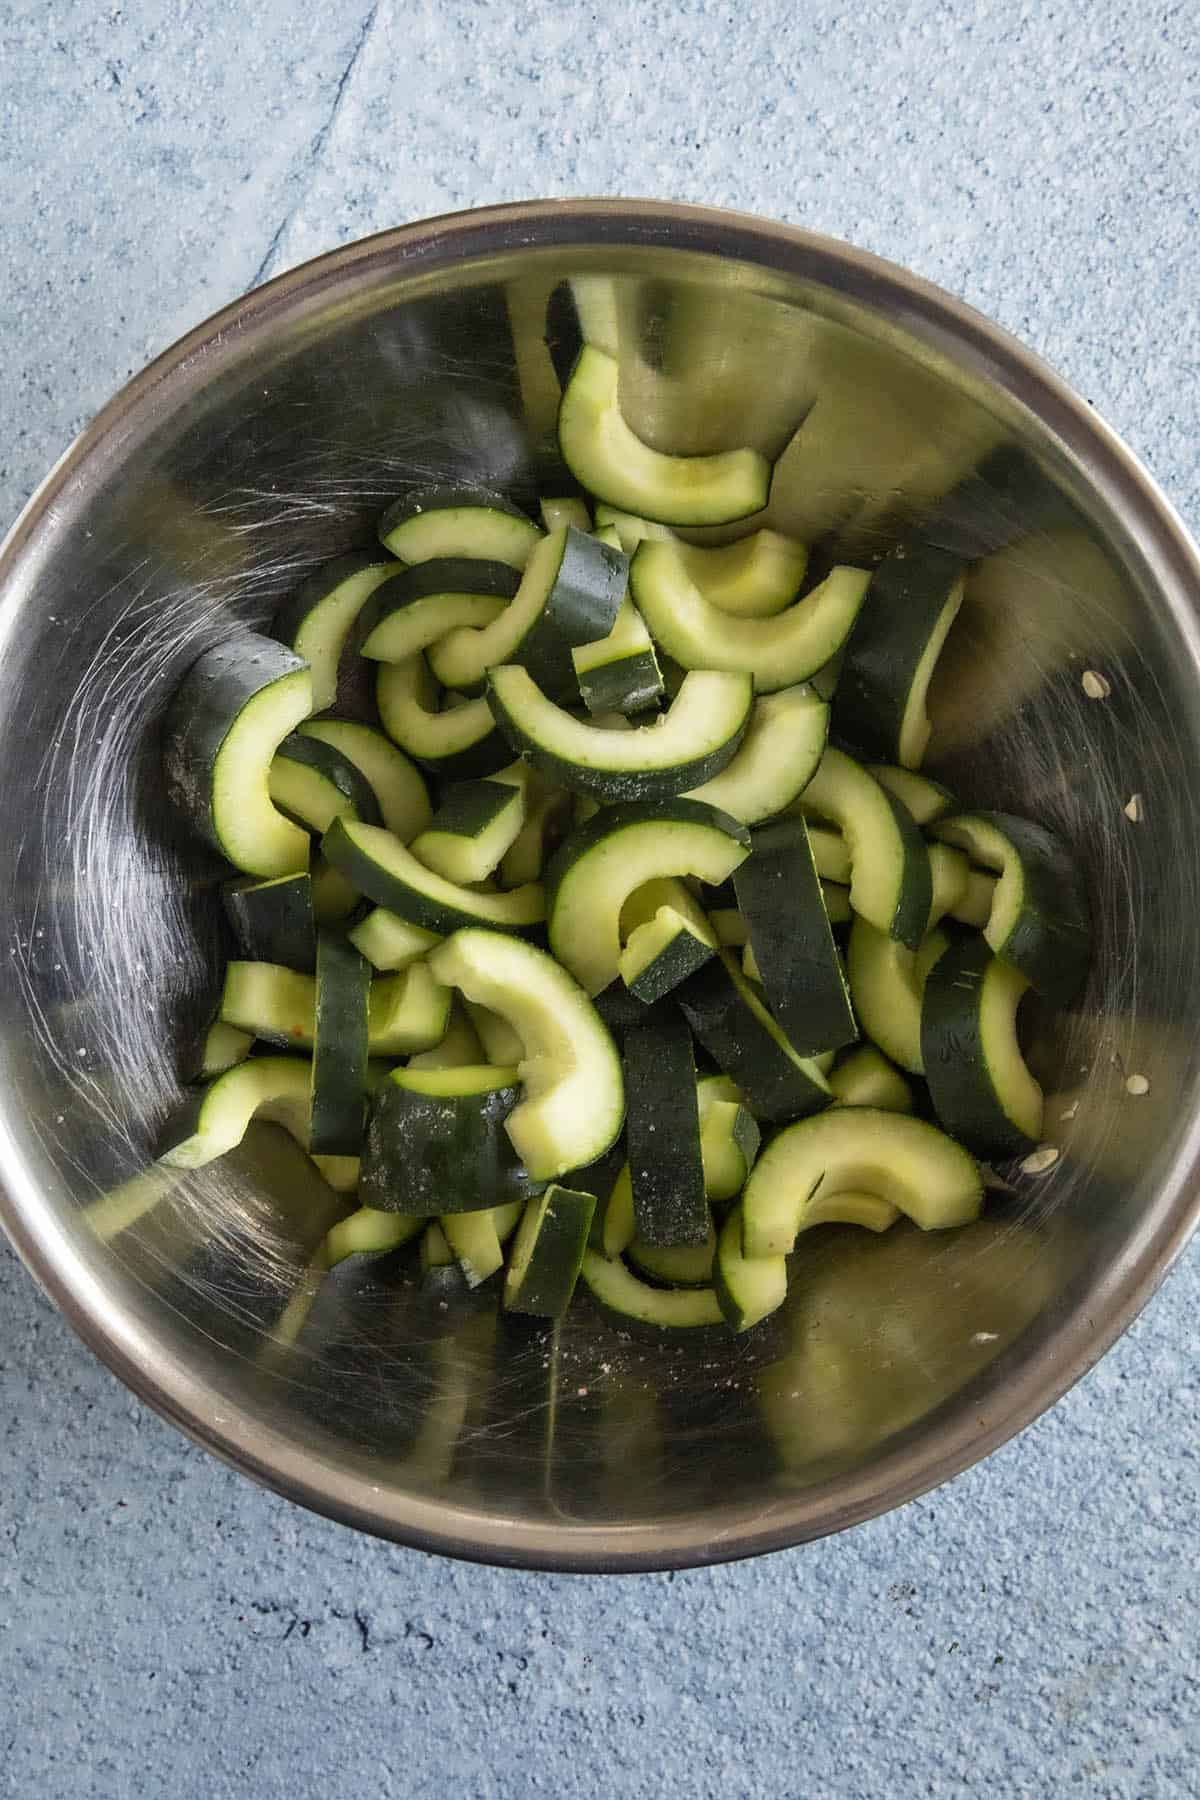 Sliced cucumbers draining in a bowl